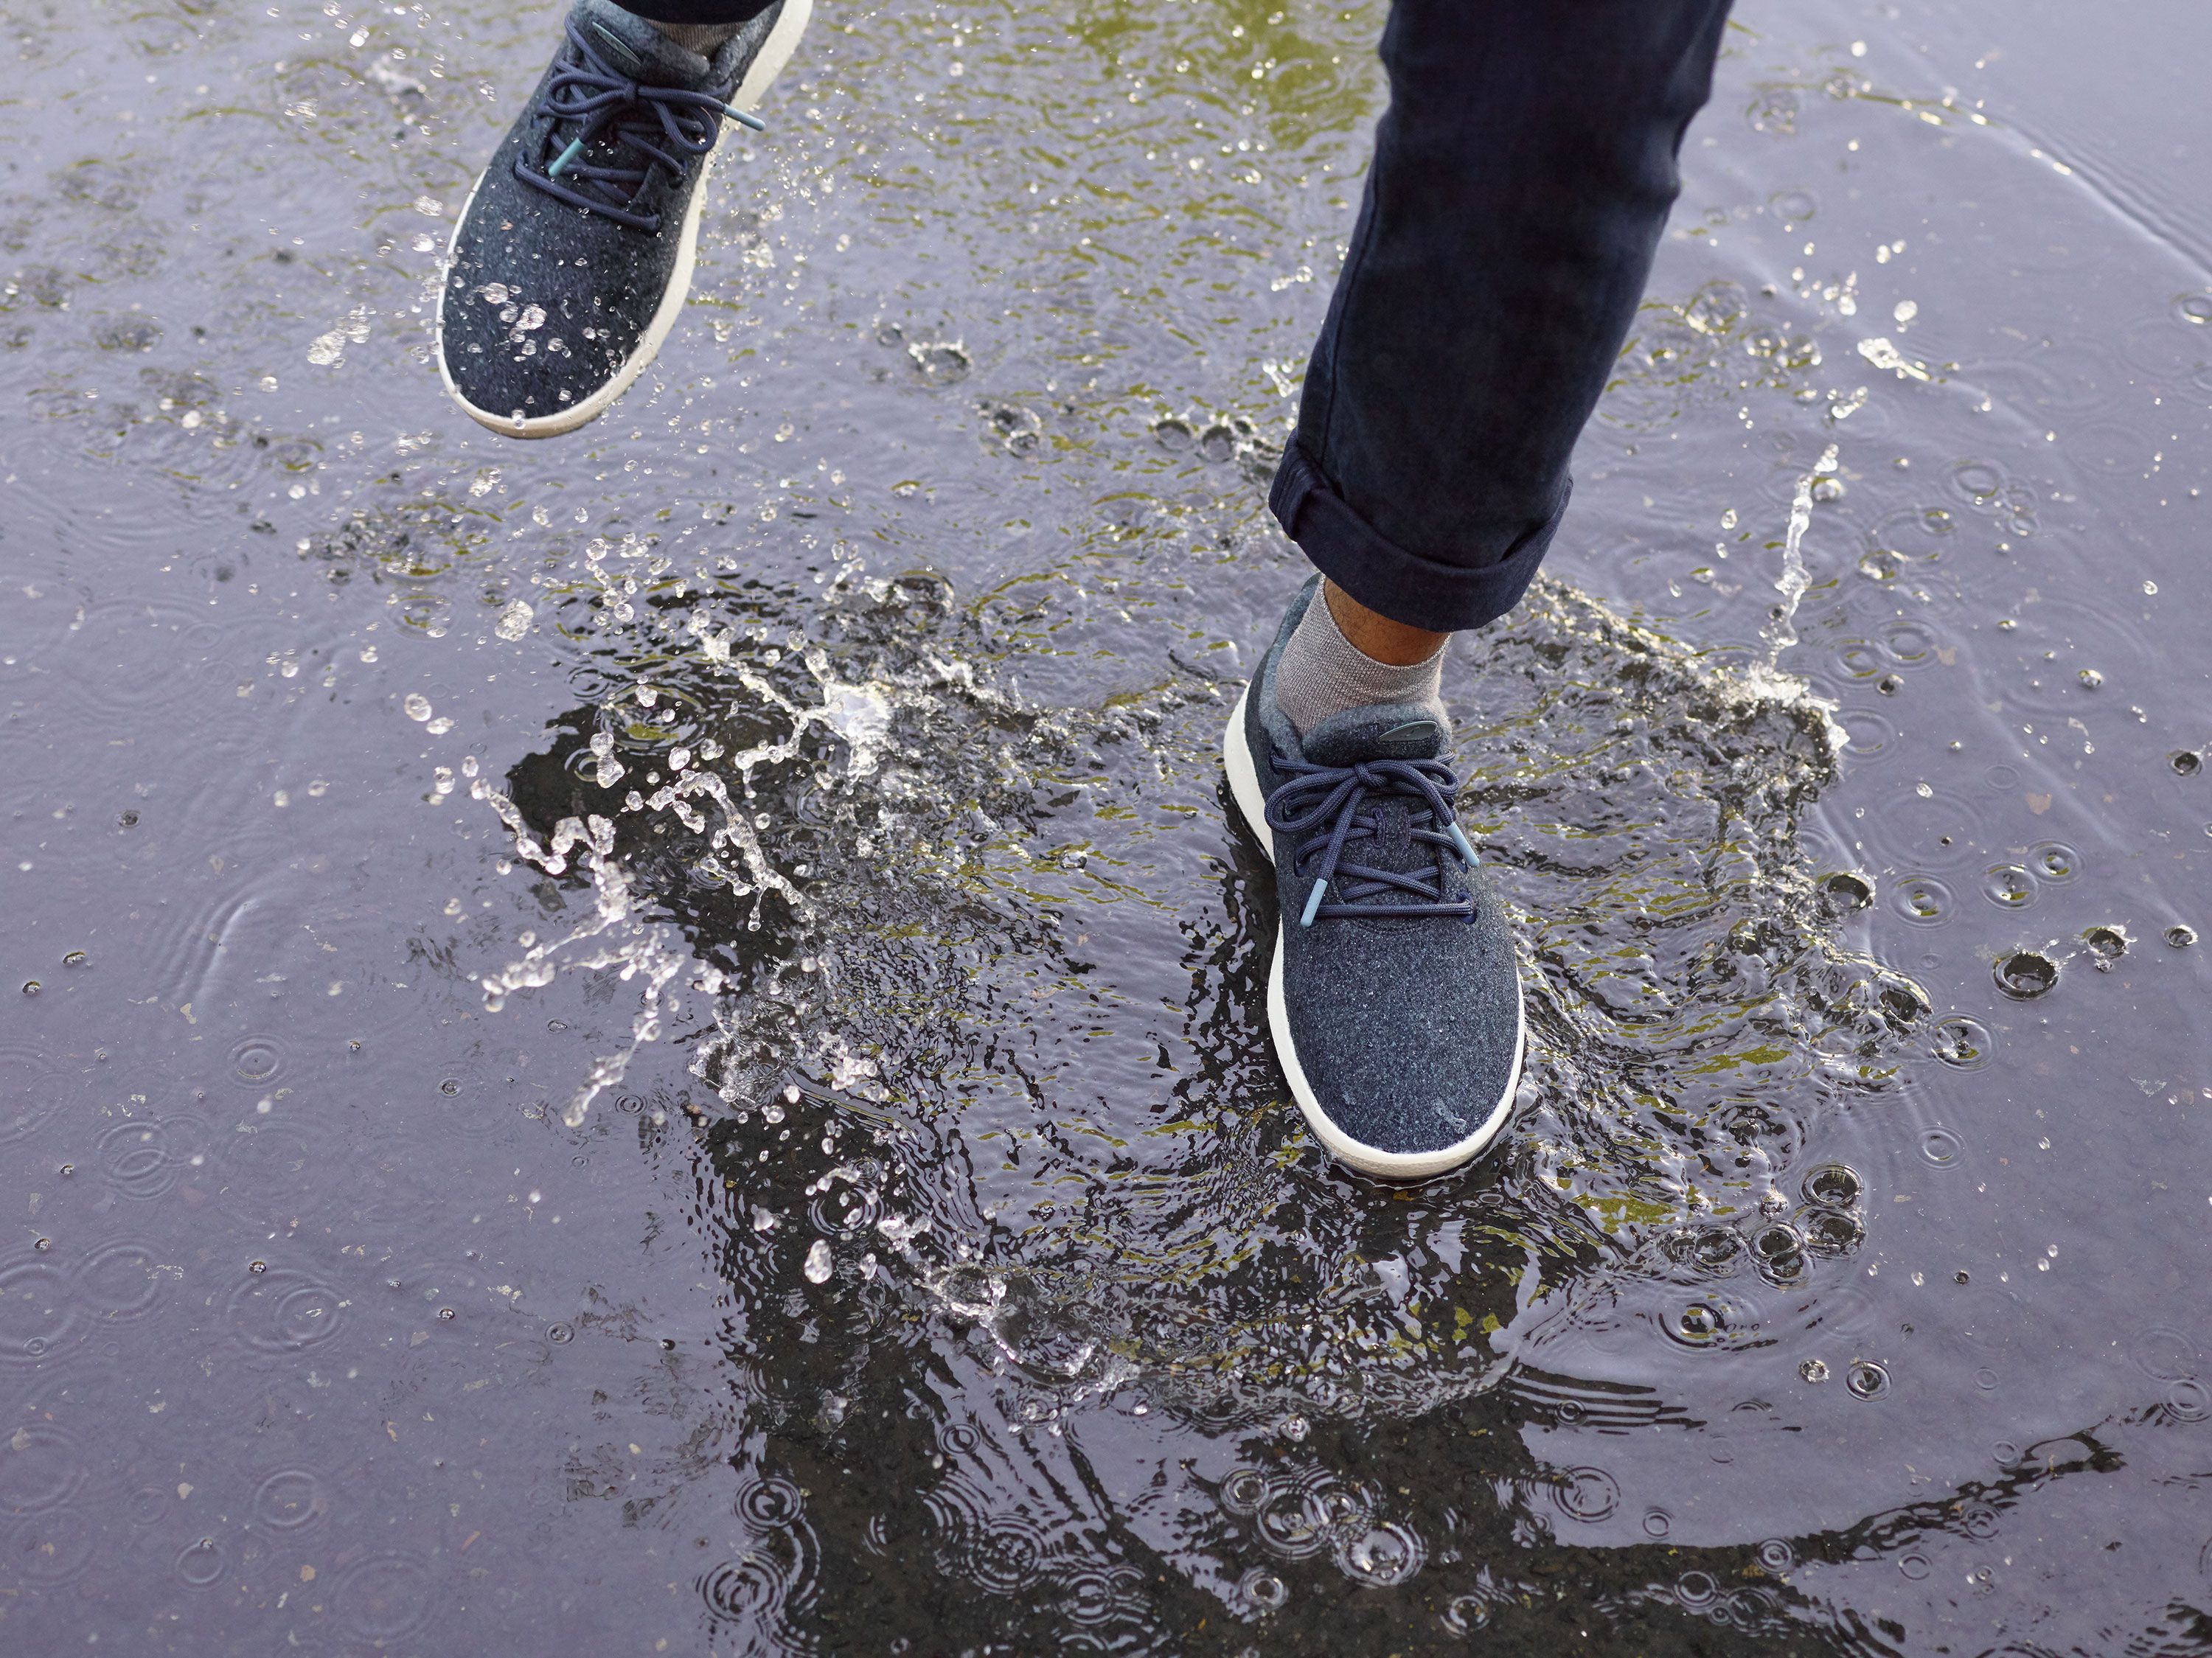 affordable waterproof shoes